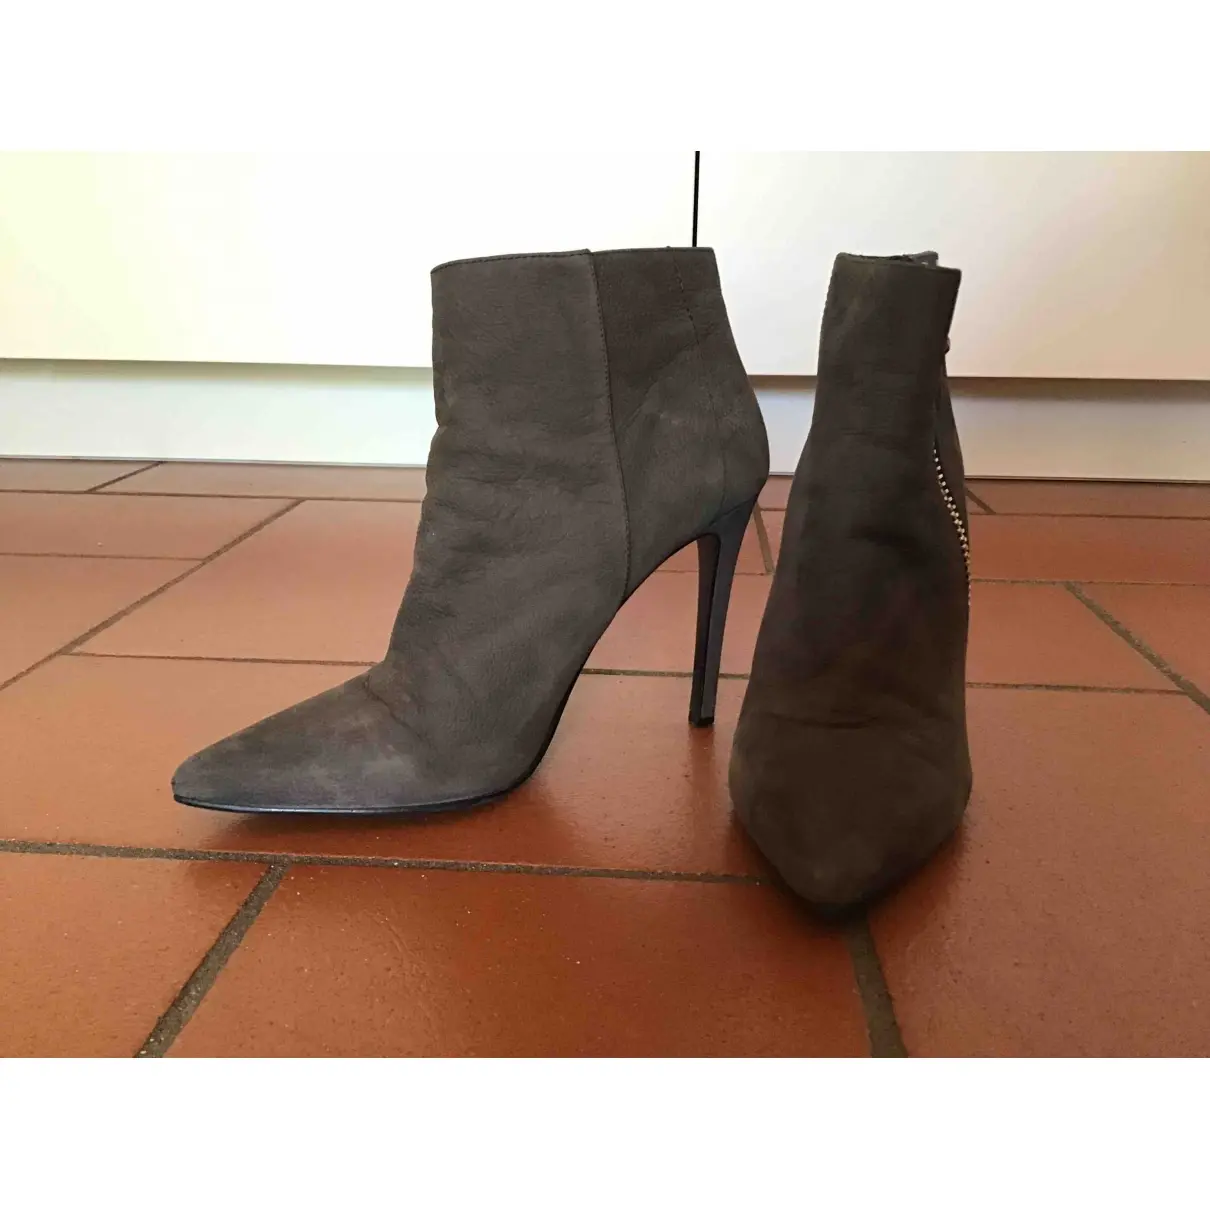 Lola Cruz Ankle boots for sale